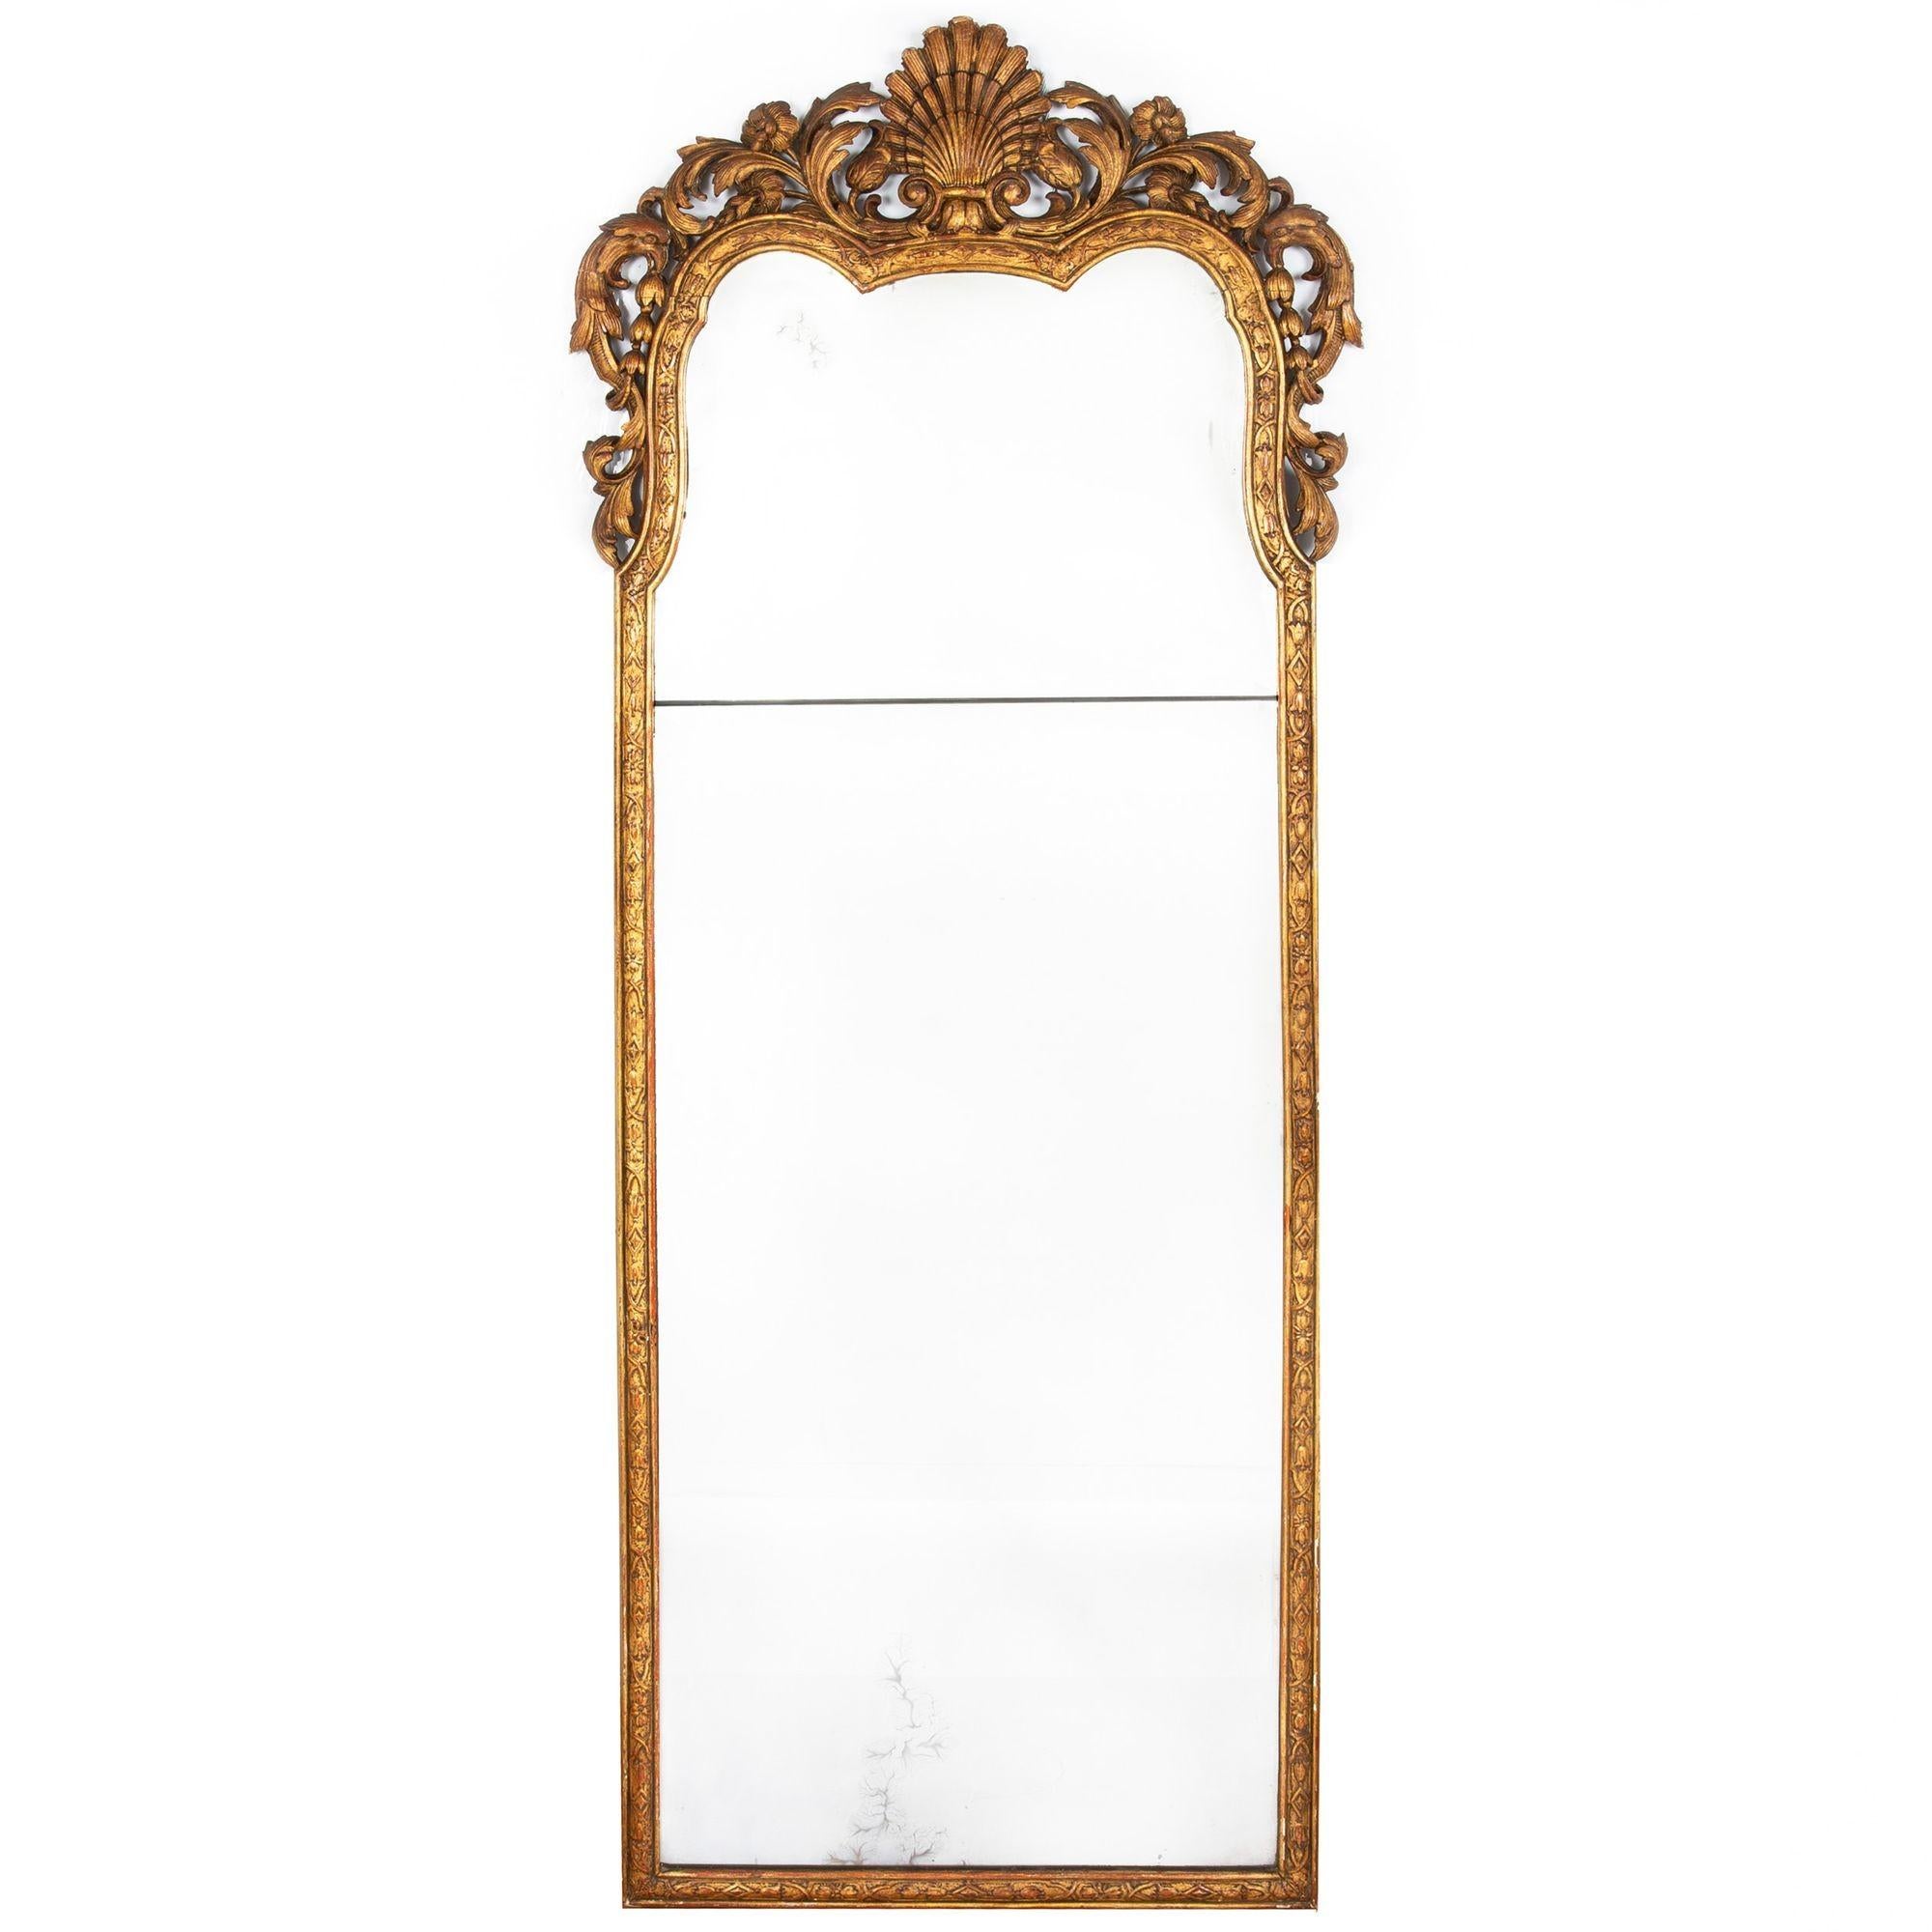 Queen Anne Very Fine Pair of English Giltwood Antique Wall Mirrors, 19th Century